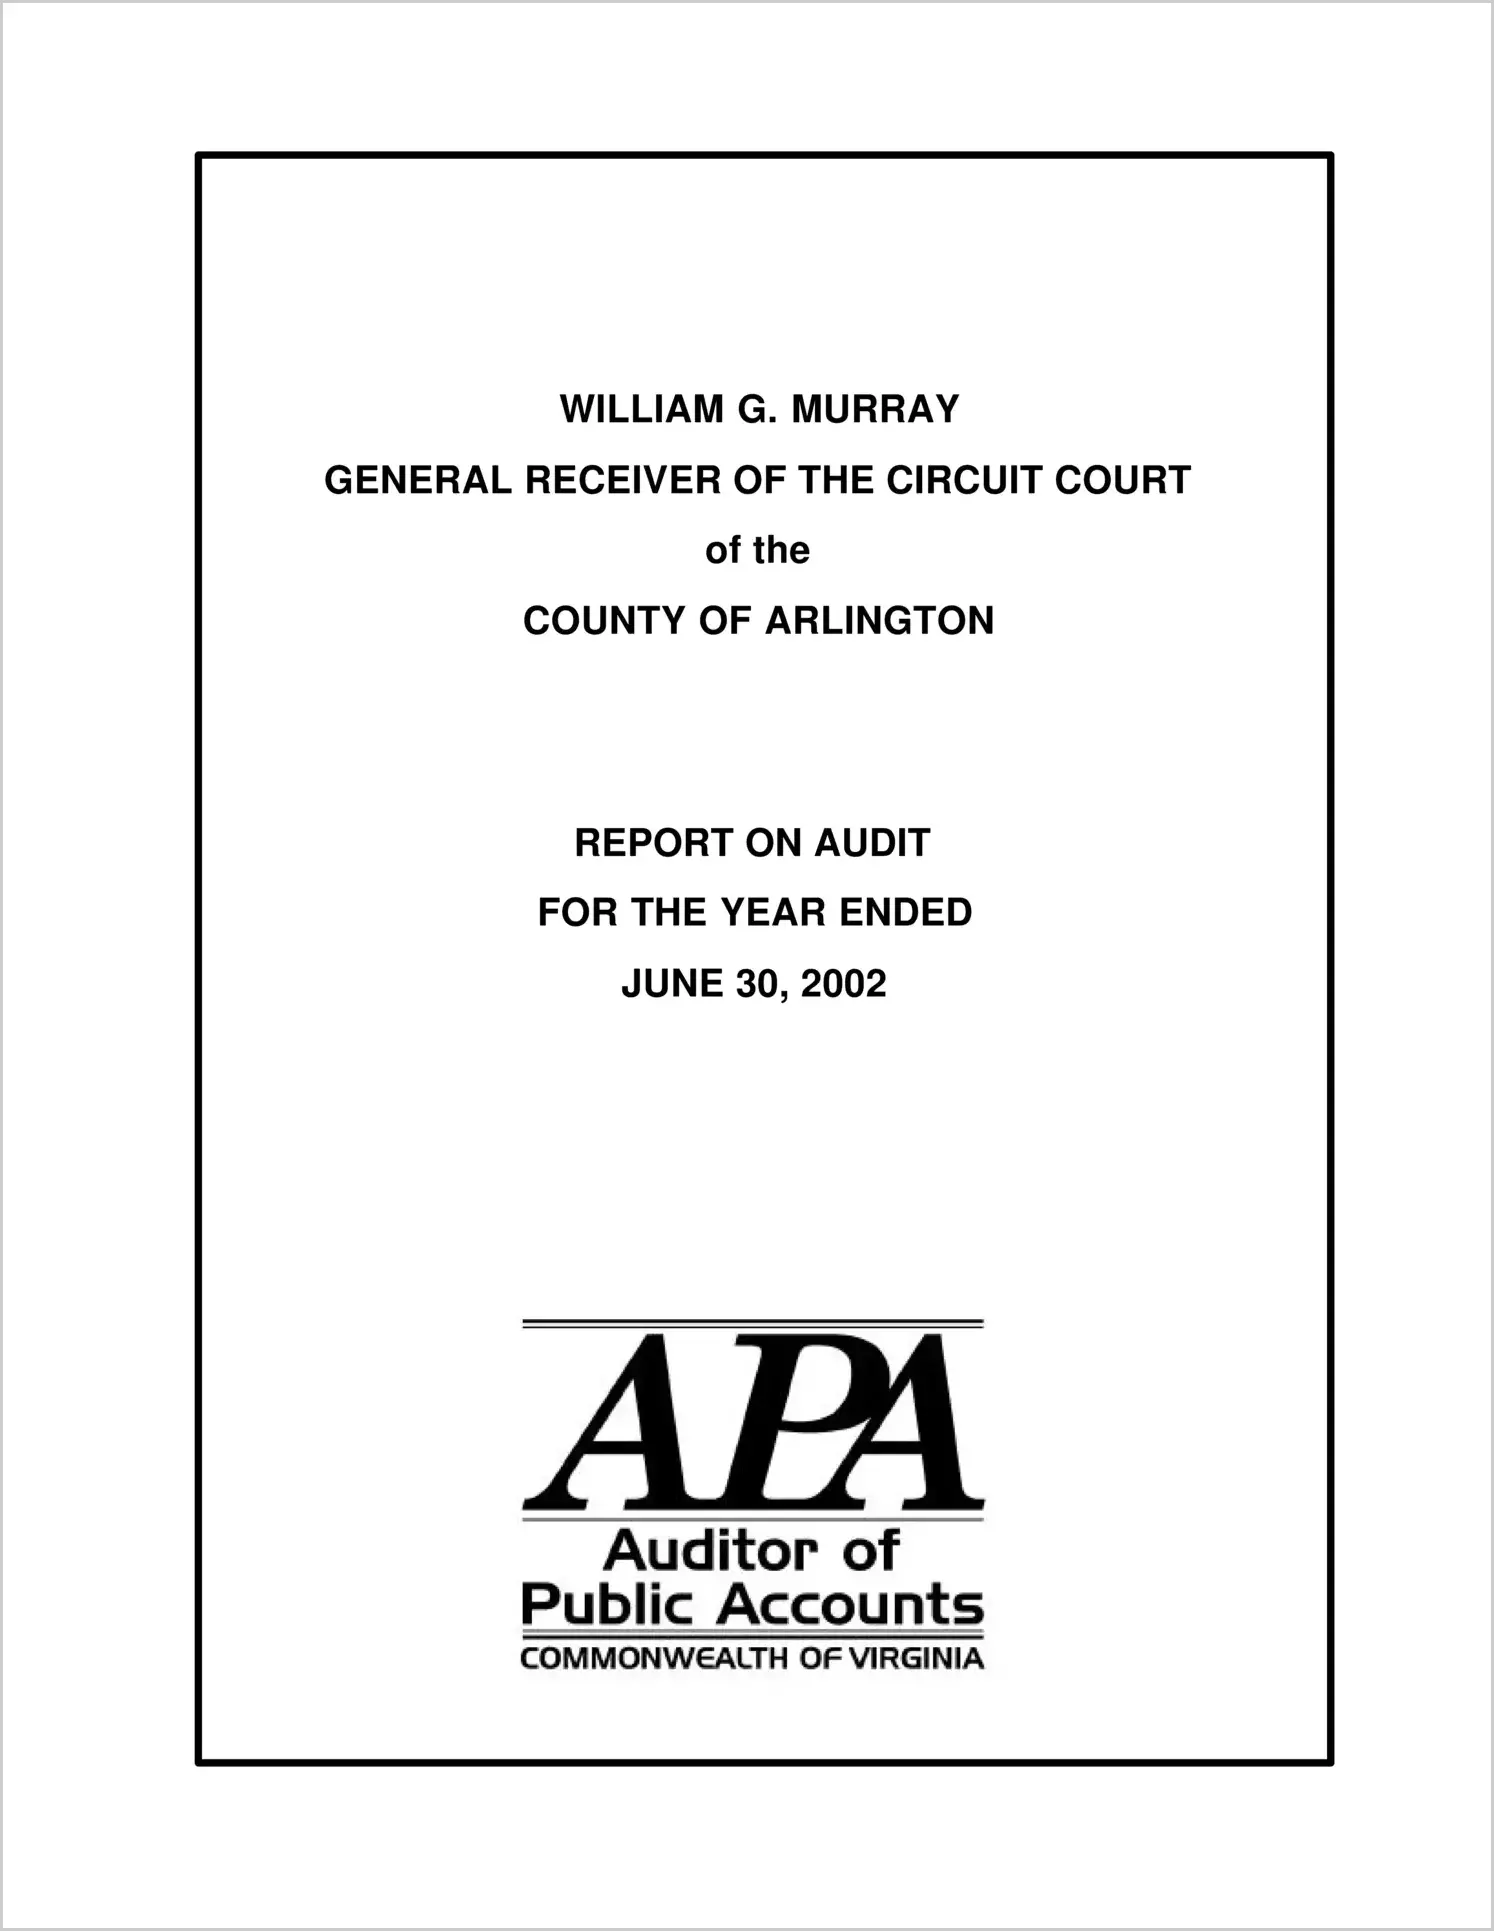 General Receiver of the Circuit Court of the County of Arlington for the period July 1, 2001 through June 30, 2002